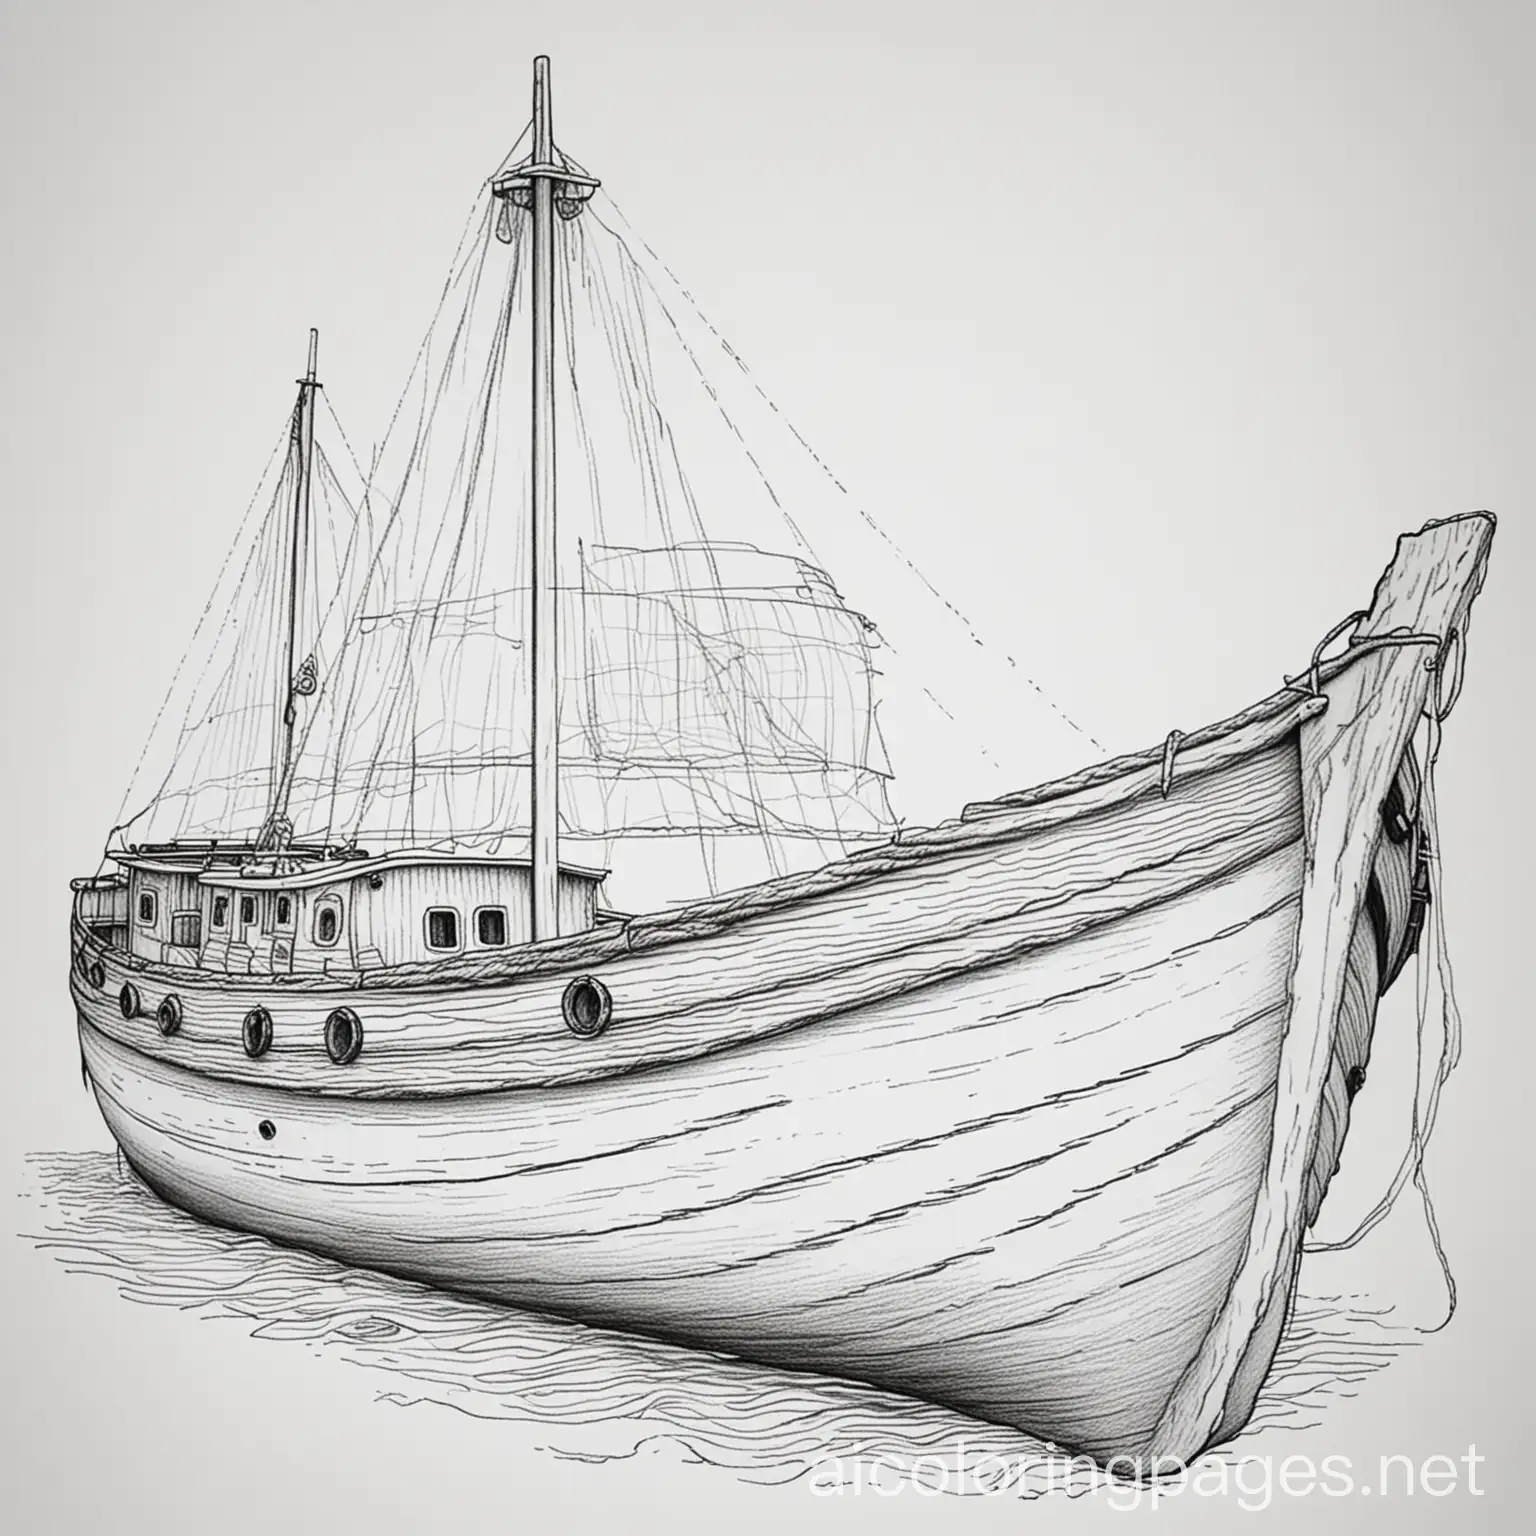 Large wood boat, Coloring Page, black and white, line art, white background, Simplicity, Ample White Space. The background of the coloring page is plain white to make it easy for young children to color within the lines. The outlines of all the subjects are easy to distinguish, making it simple for kids to color without too much difficulty